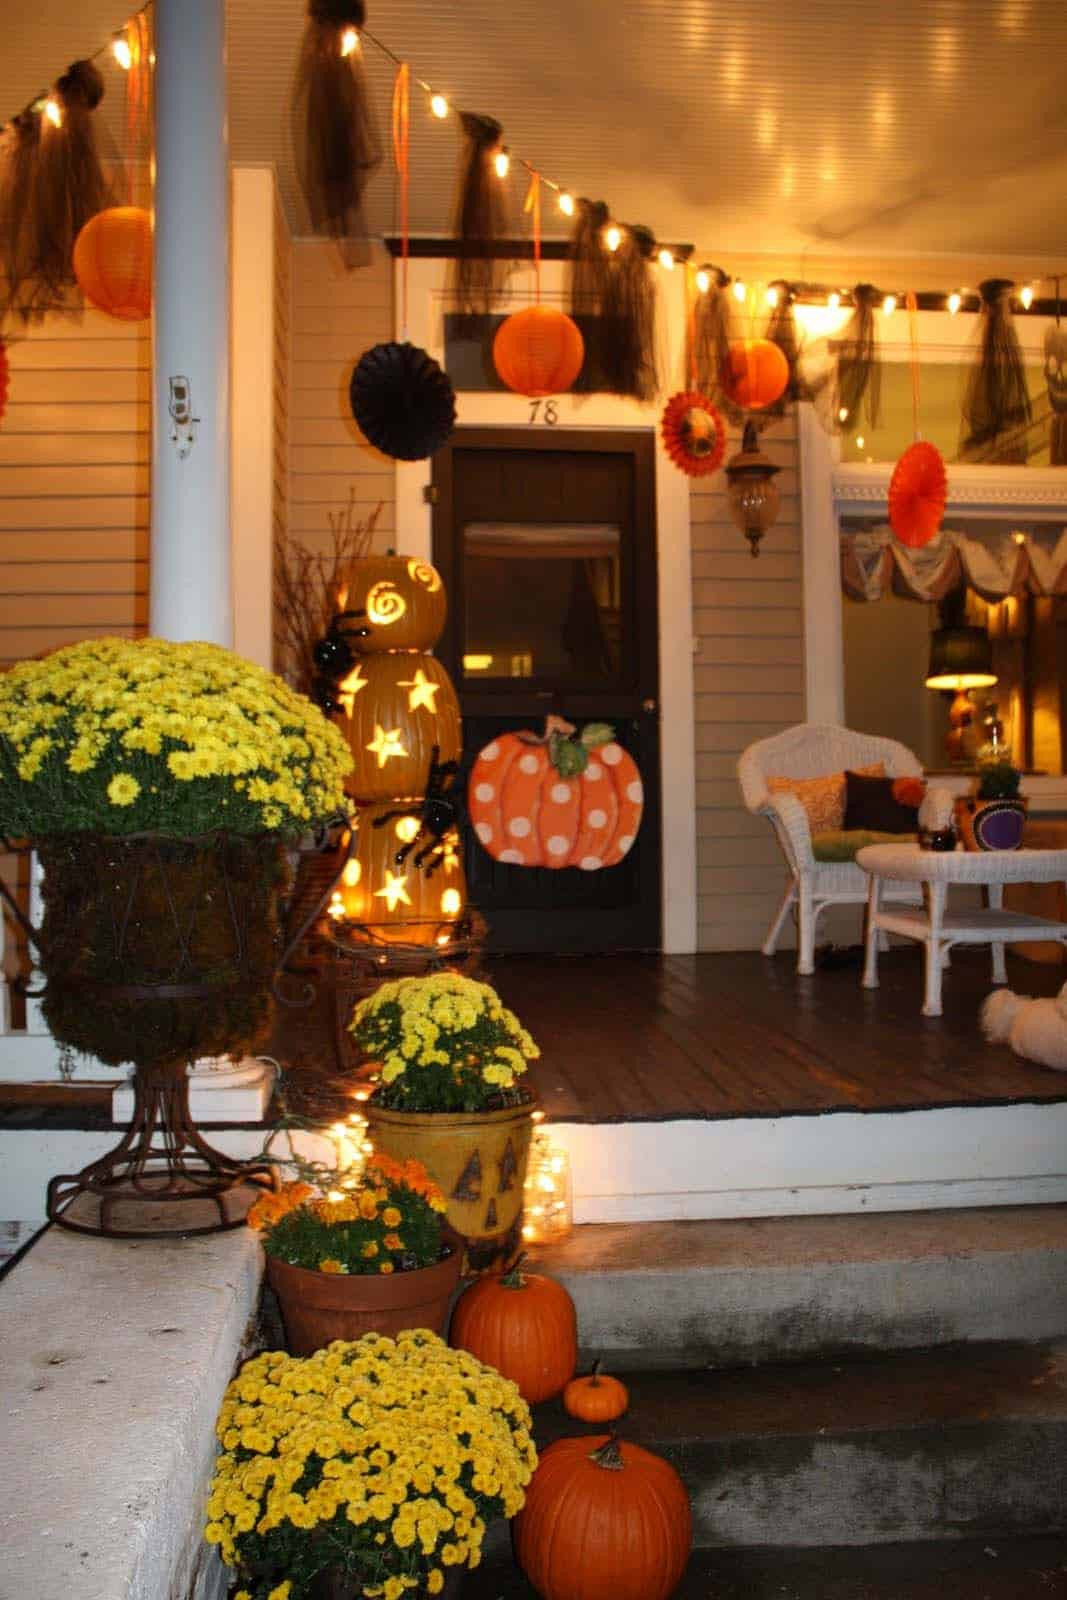 Outdoor Fall Decorating Ideas
 46 of the Coziest Ways to Decorate your Outdoor Spaces for